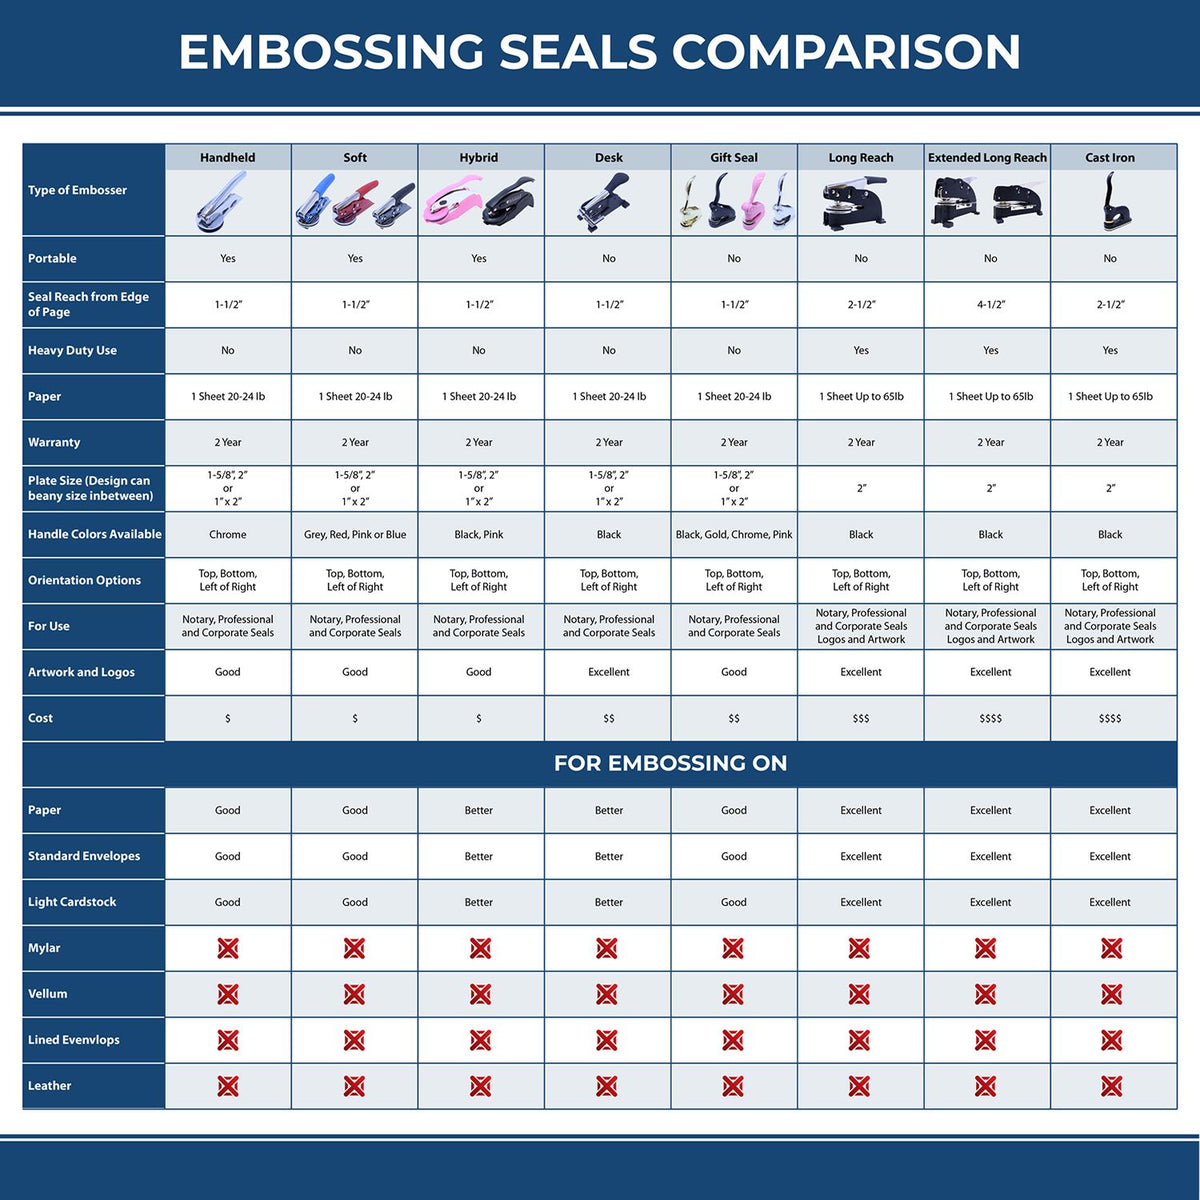 A comparison chart for the different types of mount models available for the Maryland Engineer Desk Seal.